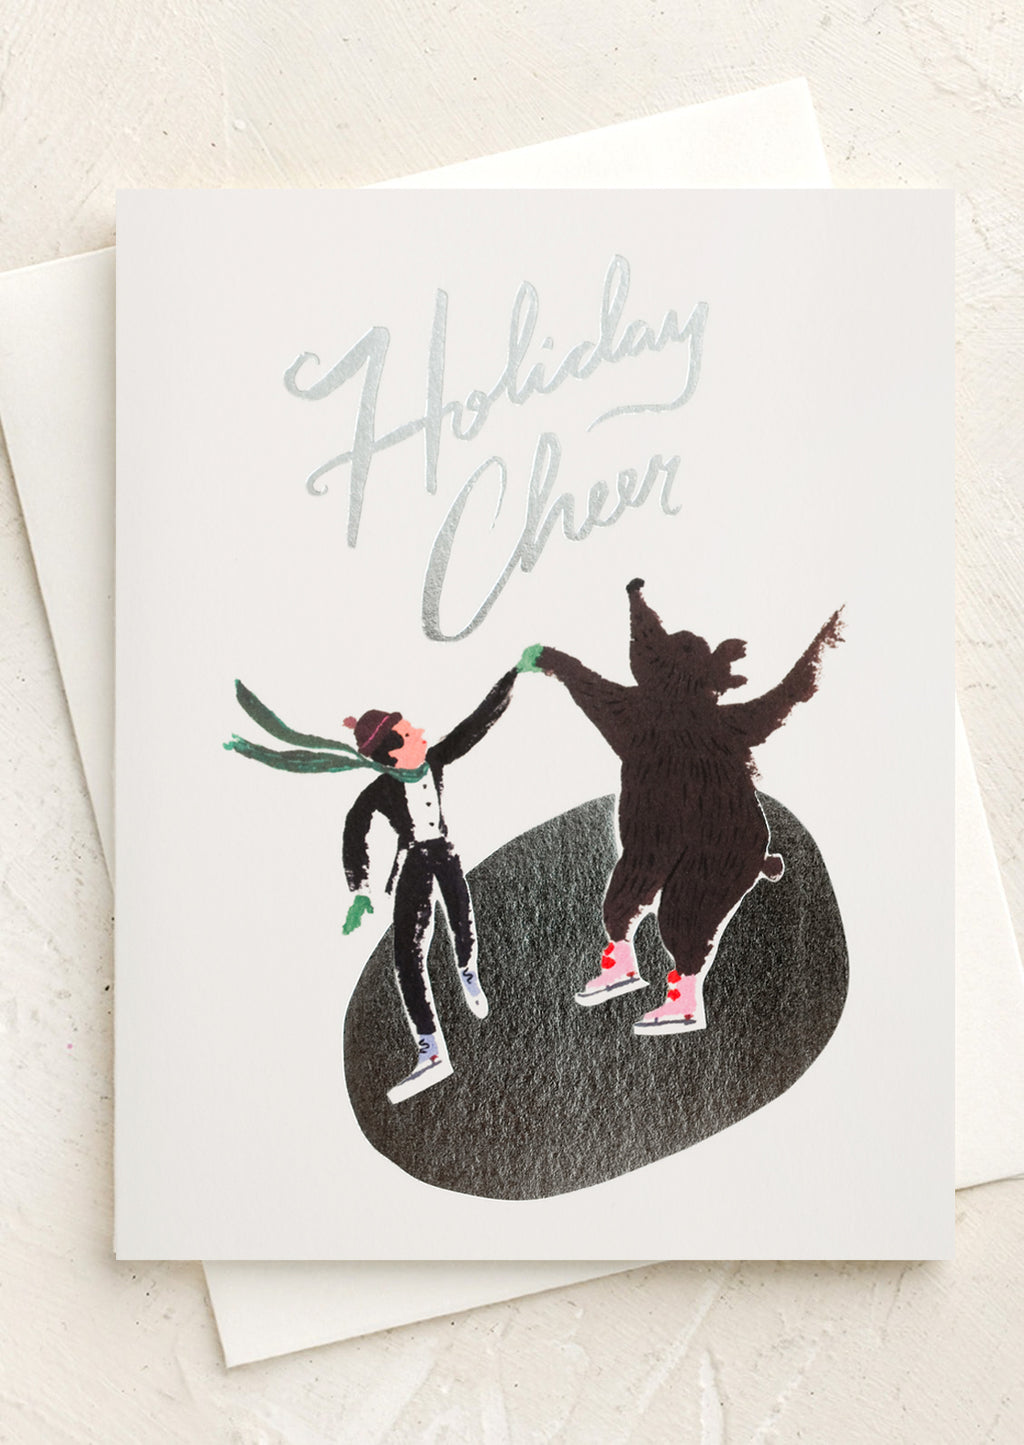 2: A set of cards depicting an ice skater and bear skating on silver pond, text reads "Holiday cheer".